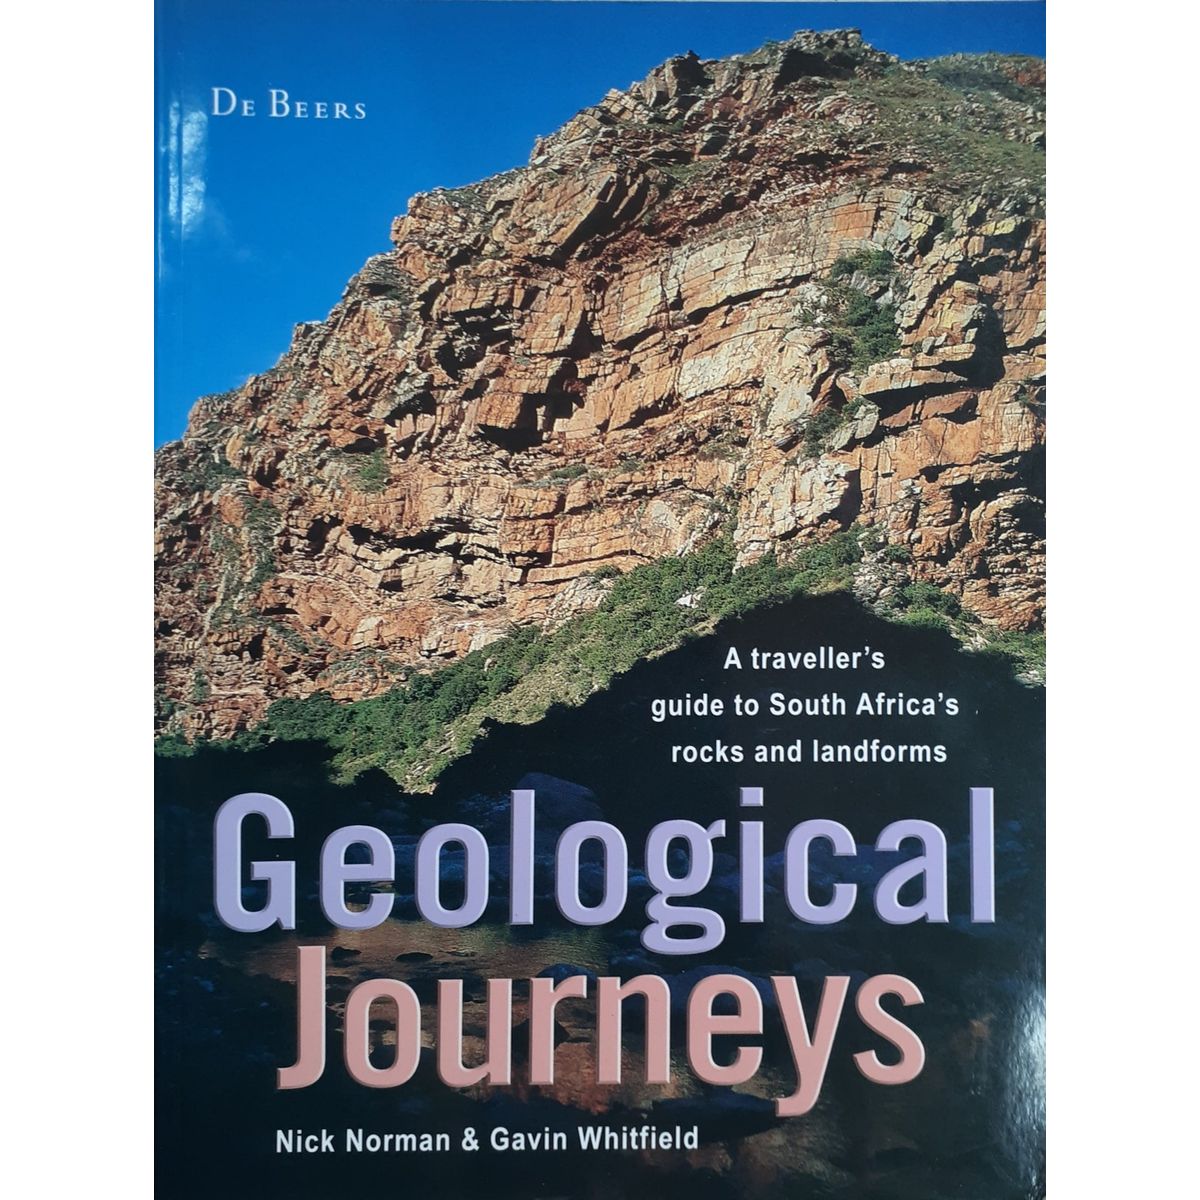 ISBN: 9781770070622 / 1770070621 - Geological Journeys: A Traveller's Guide to South Africa's Rocks and Landforms by Nick Norman & Gavin Whitfield [2006]